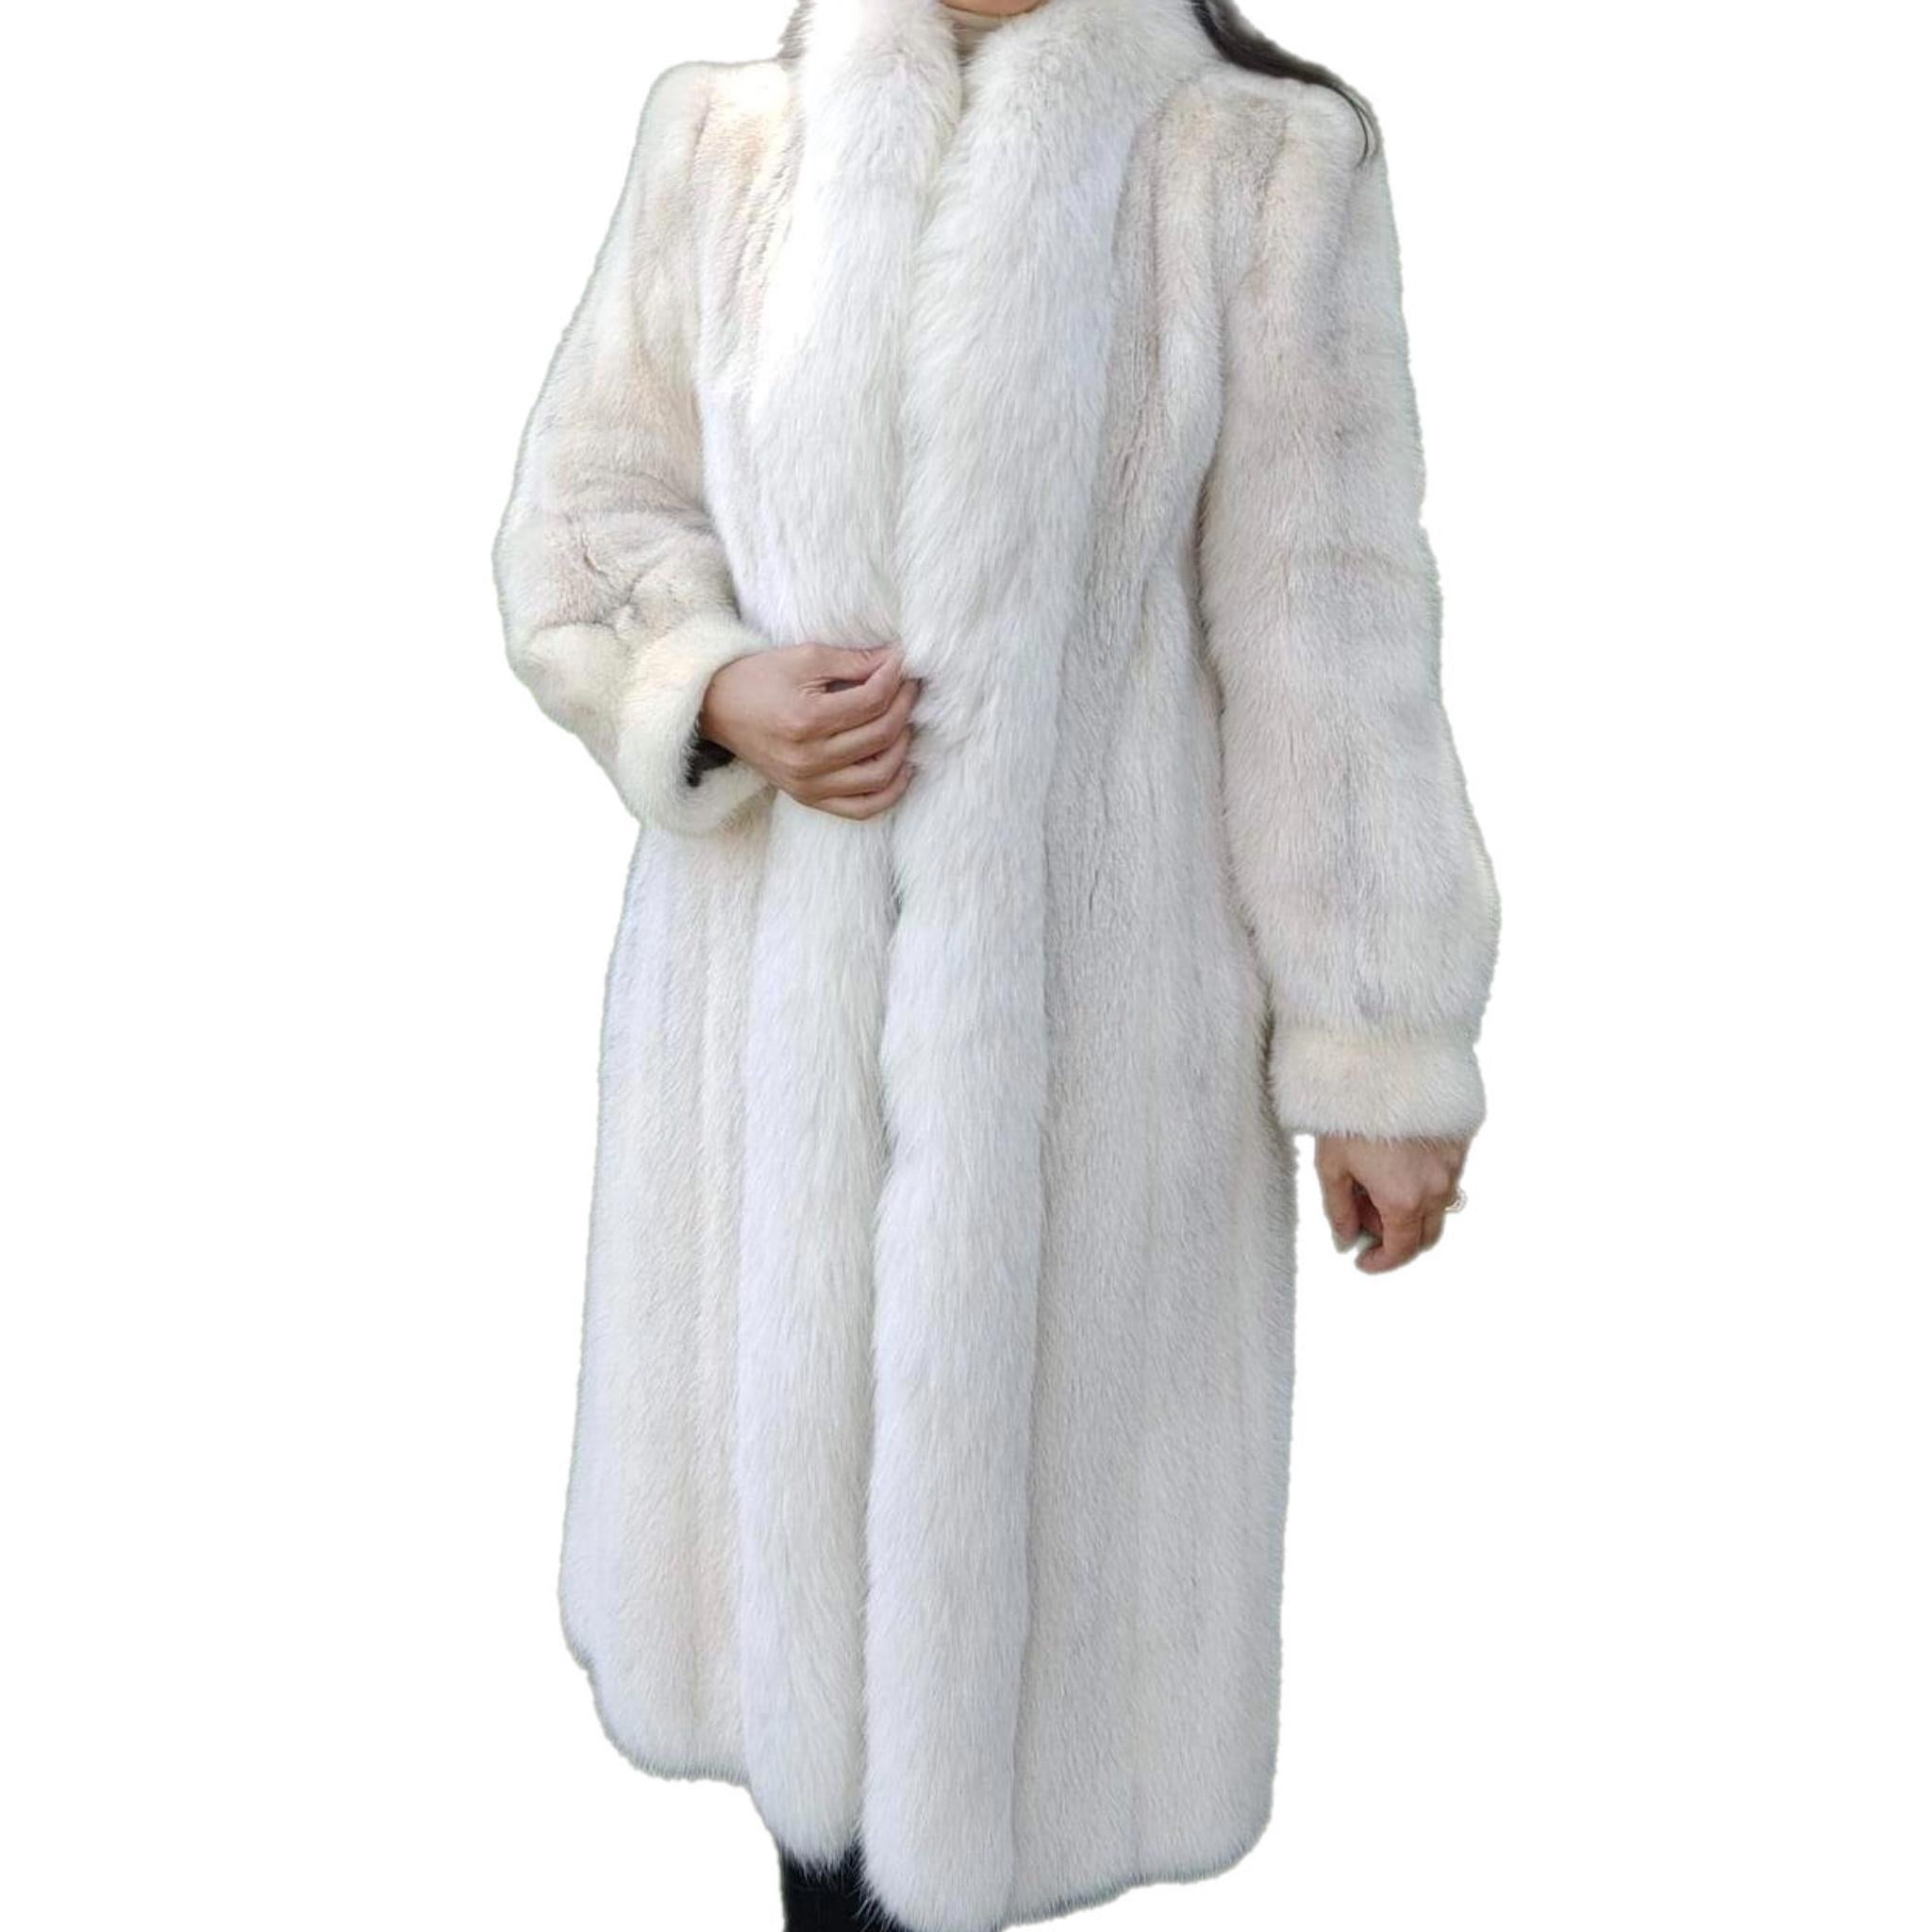 ~Unused Cross Mink white Fur Coat (Size 8 - M) 

When it comes to fur, Canada Majestic is the ultimate reference in quality and style. This stunning cross mink coat is a classic with the tuxedo design and fox trim classic borders. It has a fluffy